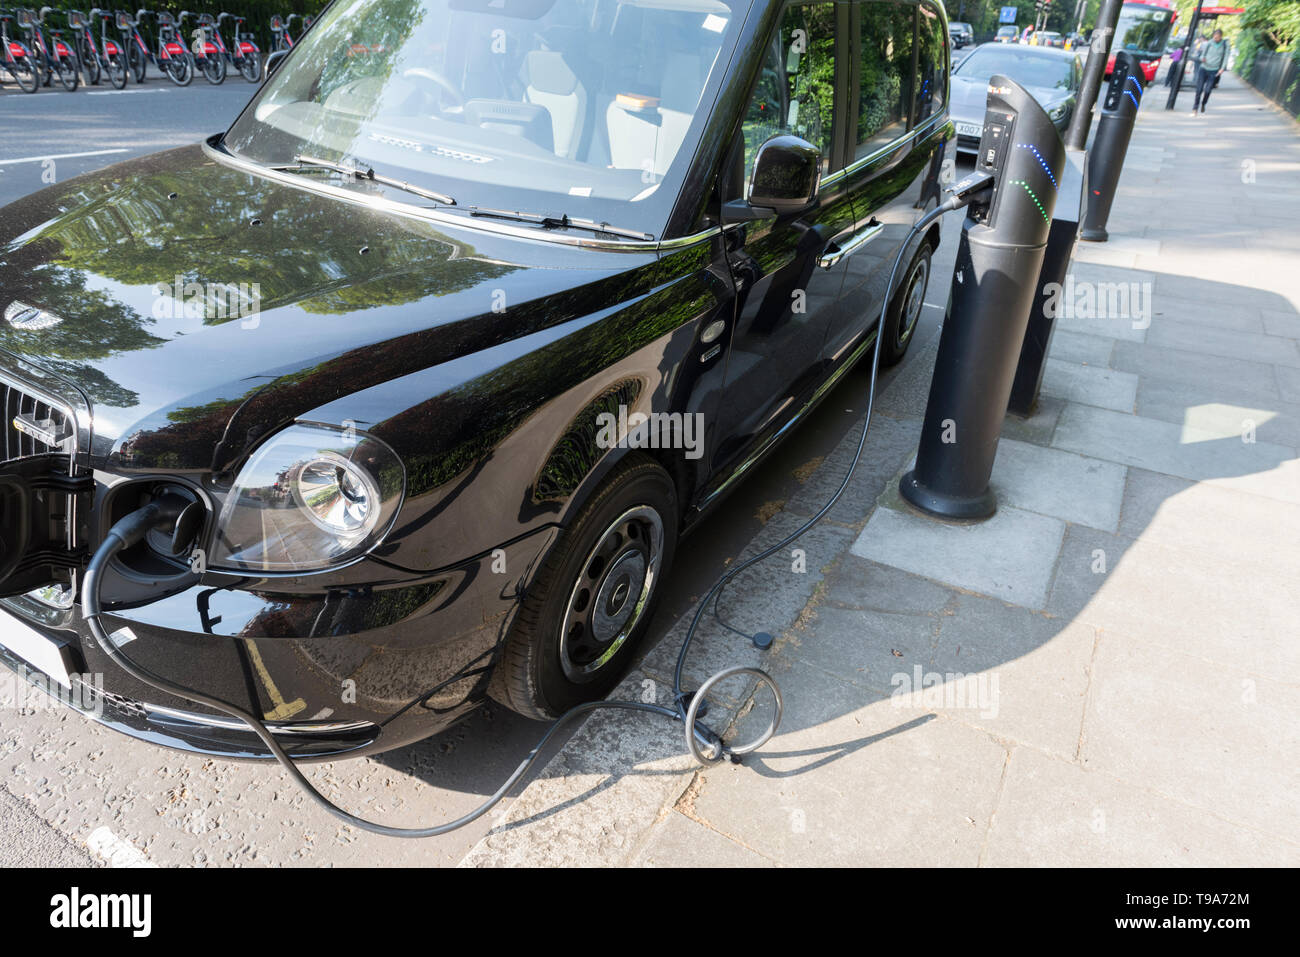 London Taxi Cab charging an internal battery at street side charging point in Eton Square, London, England, UK. Stock Photo